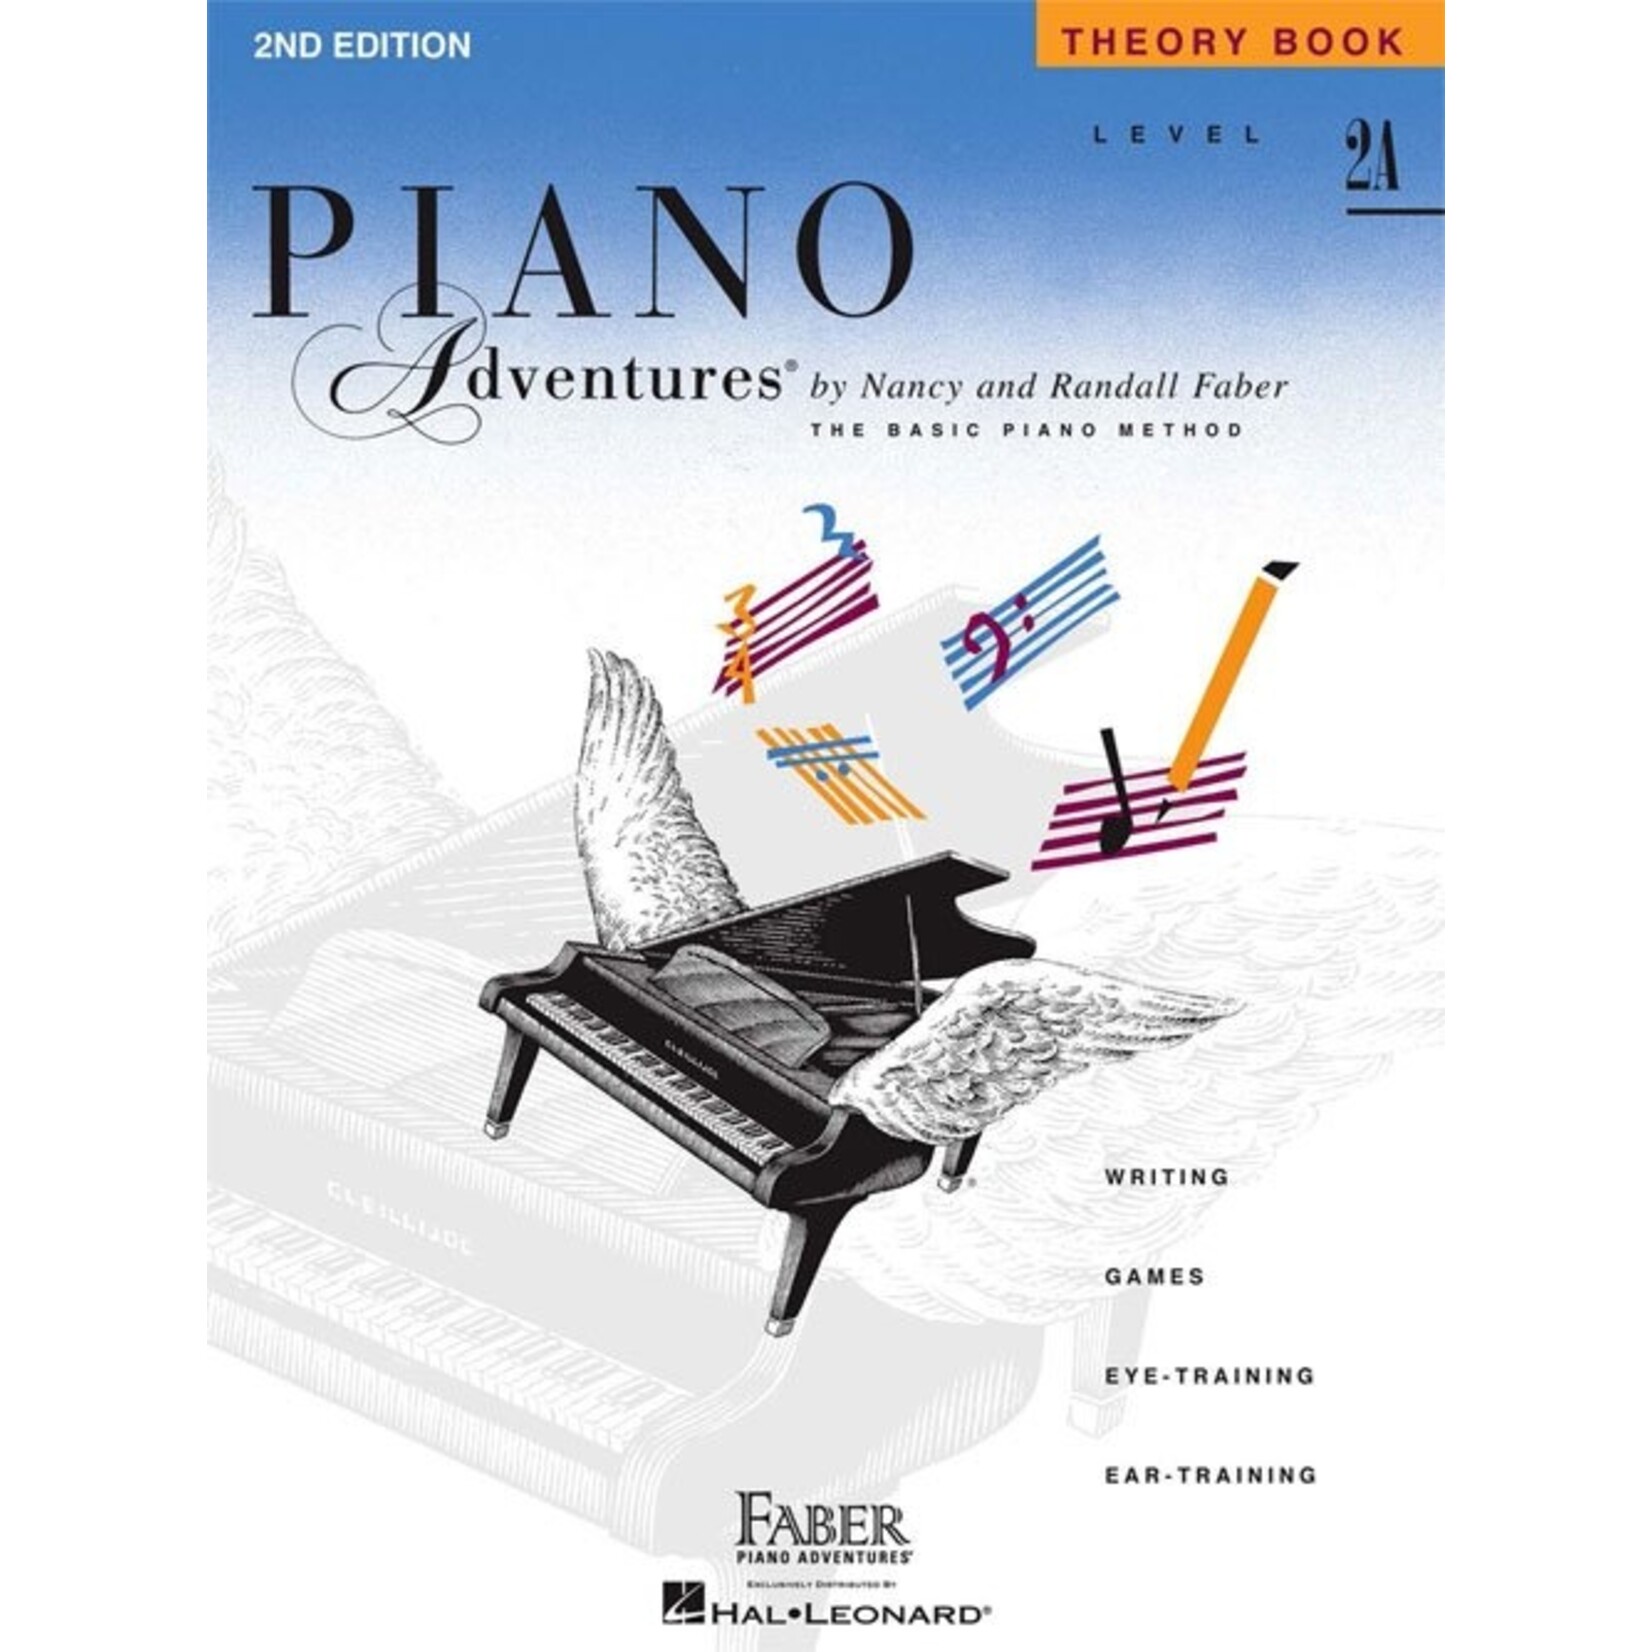 Faber Piano Adventures Level 2A - Theory Book - Faber 2nd Edition